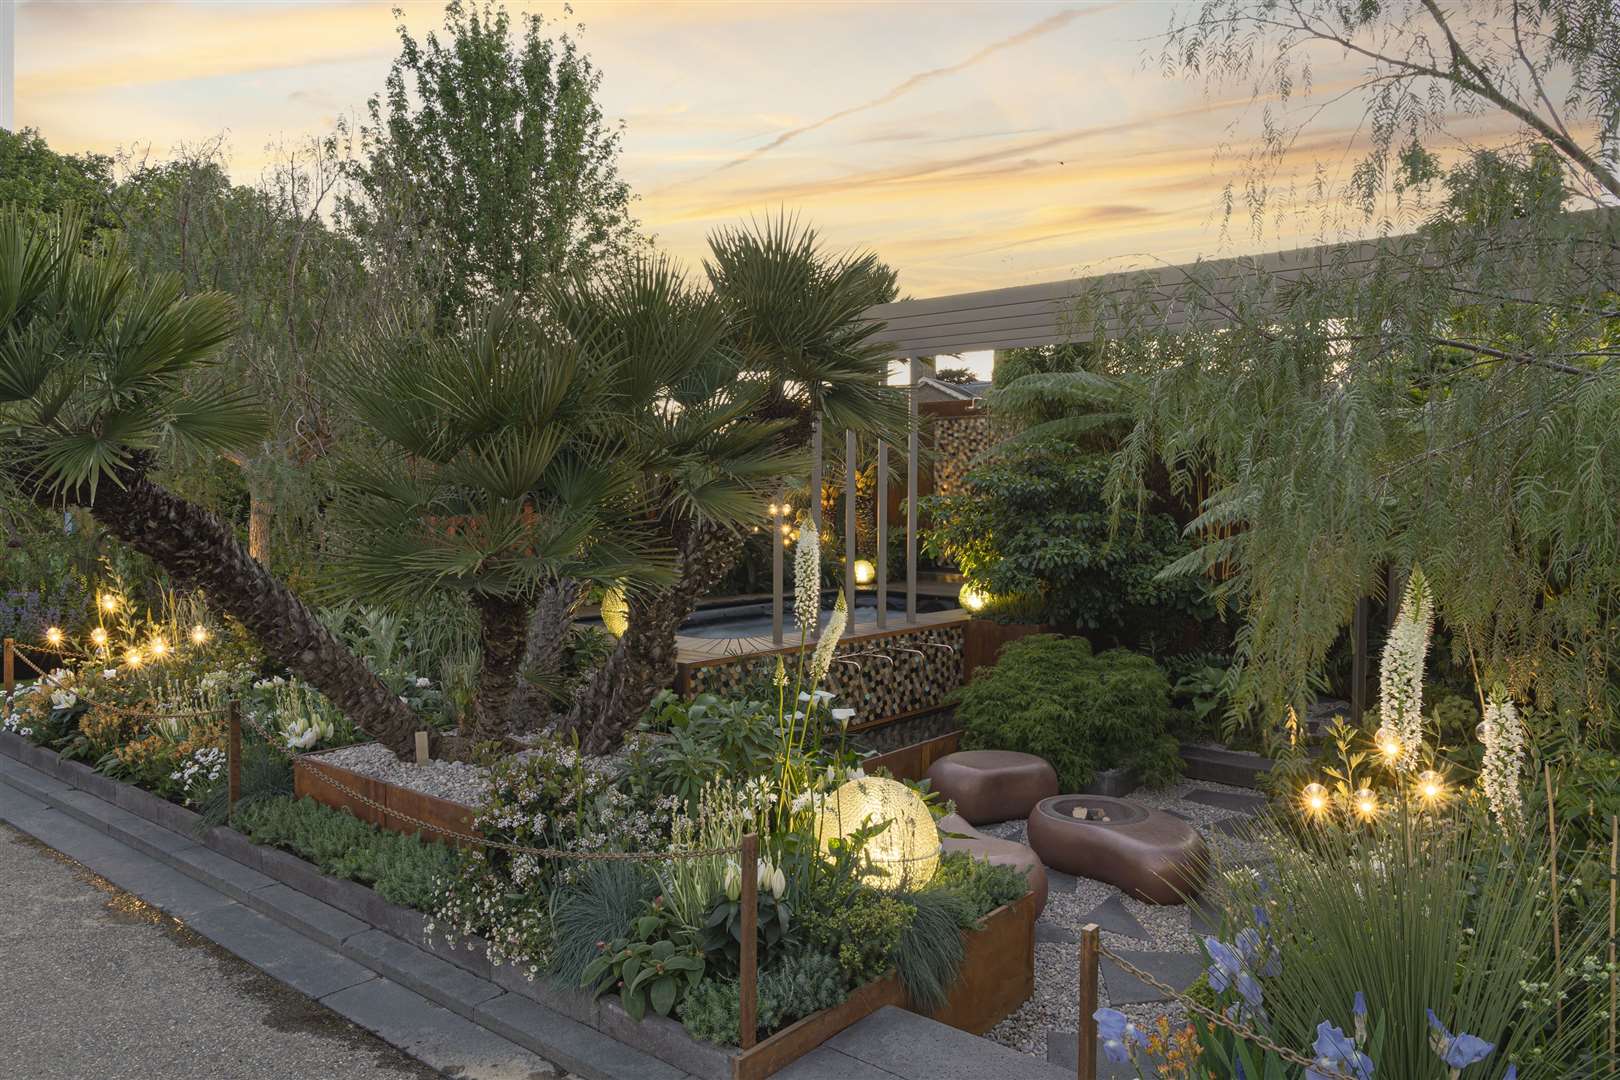 Out Of The Shadows Sanctuary Garden by designer Kate Gould (Helen Fickling Photography/PA)